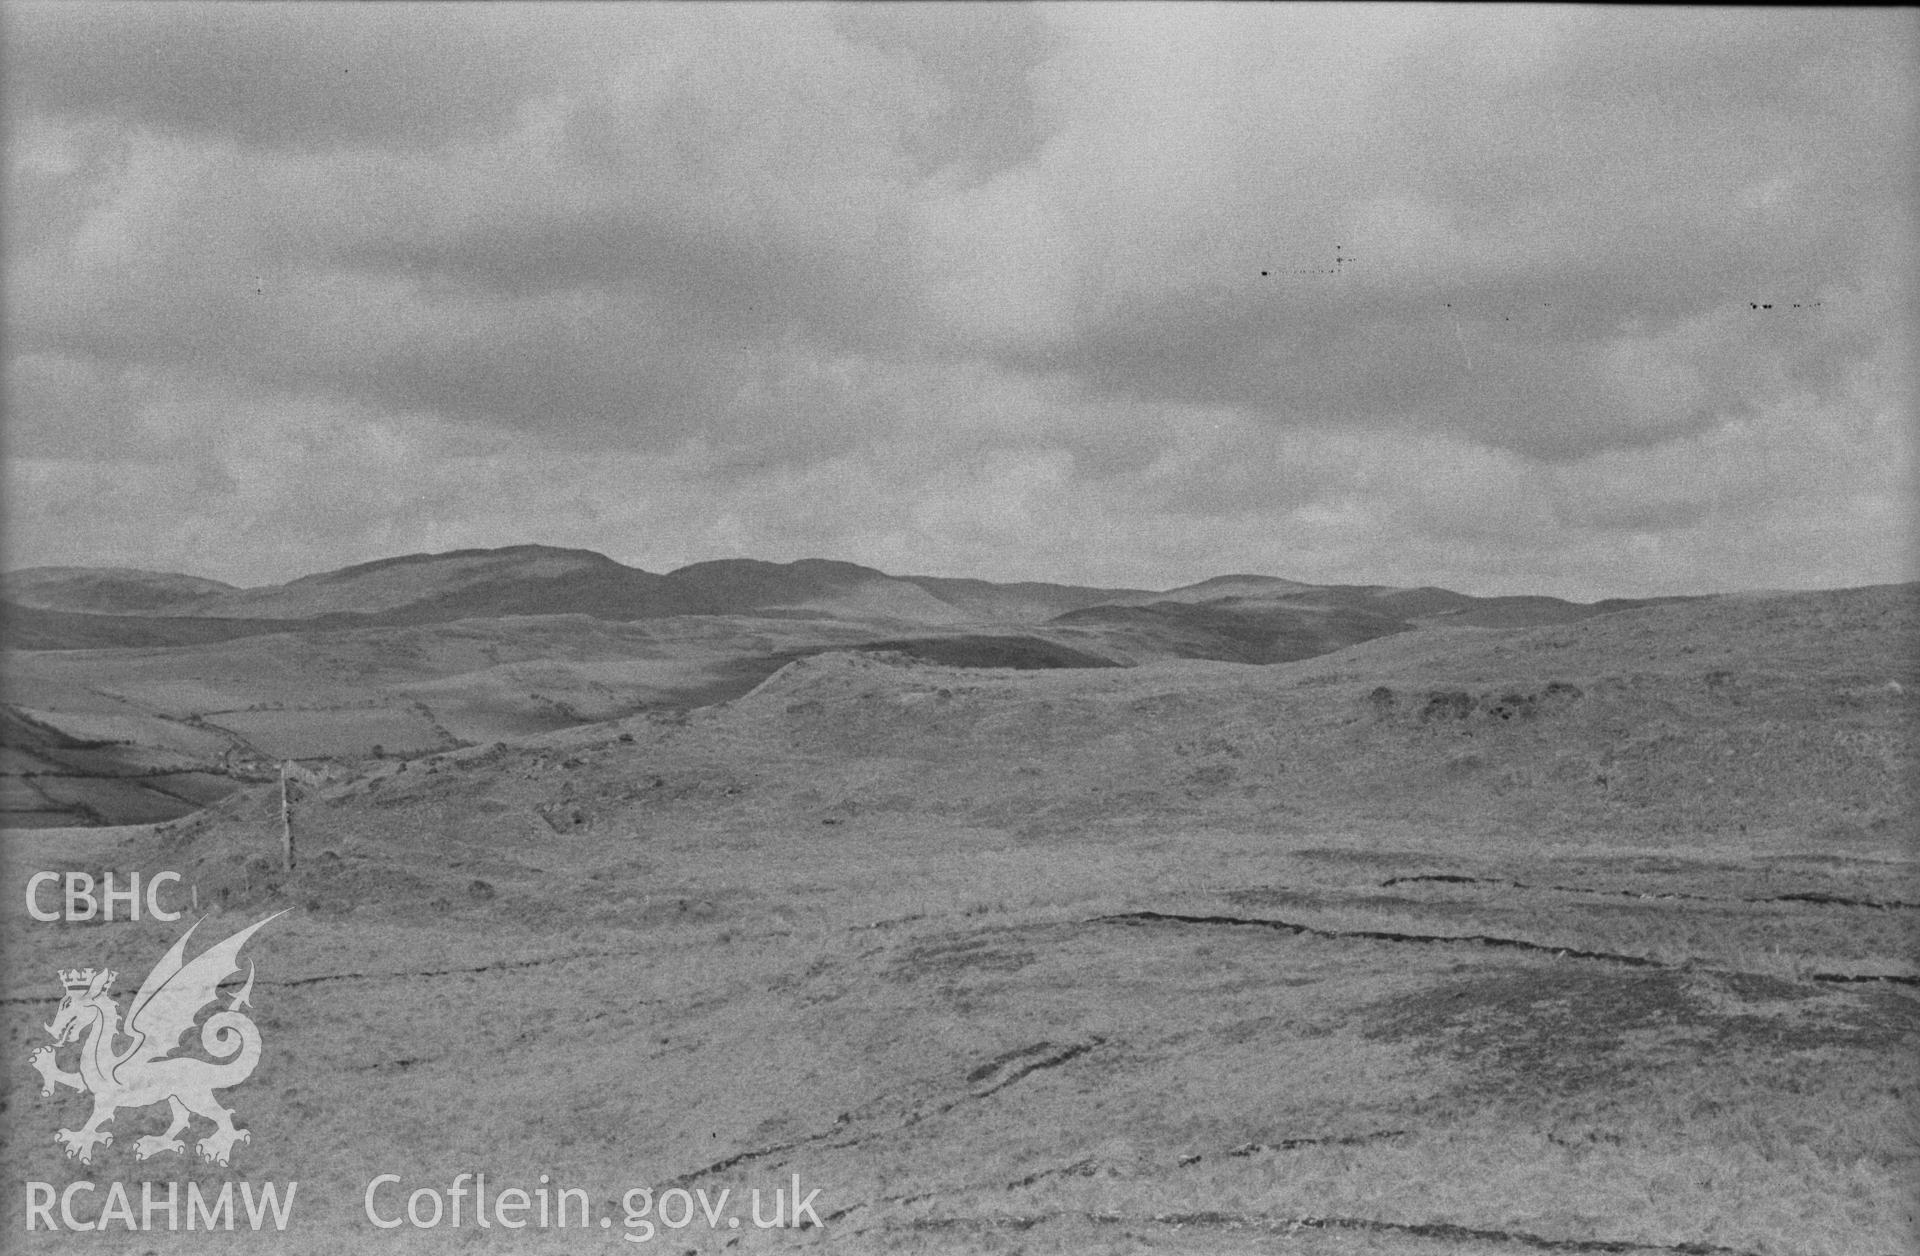 Digital copy of a black and white negative showing view of Pen Dinas, Elerch, with entrance on right. Photographed in April 1963 by Arthur O. Chater from Grid Reference SN 6764 8767, looking east. Panorama 1 of 3 photographs.